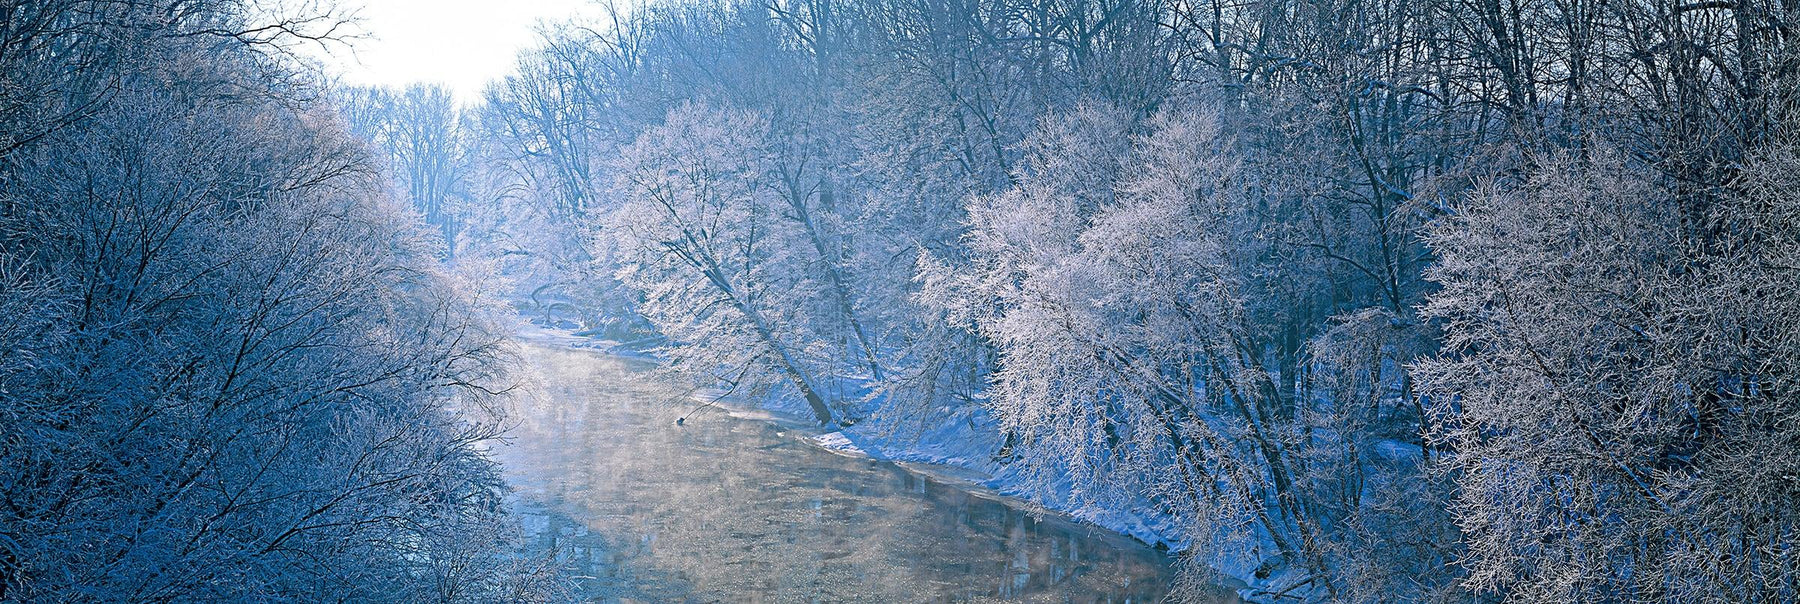 Sun shining through the frozen forest of trees surrounding a river in Wayne National Forest Ohio